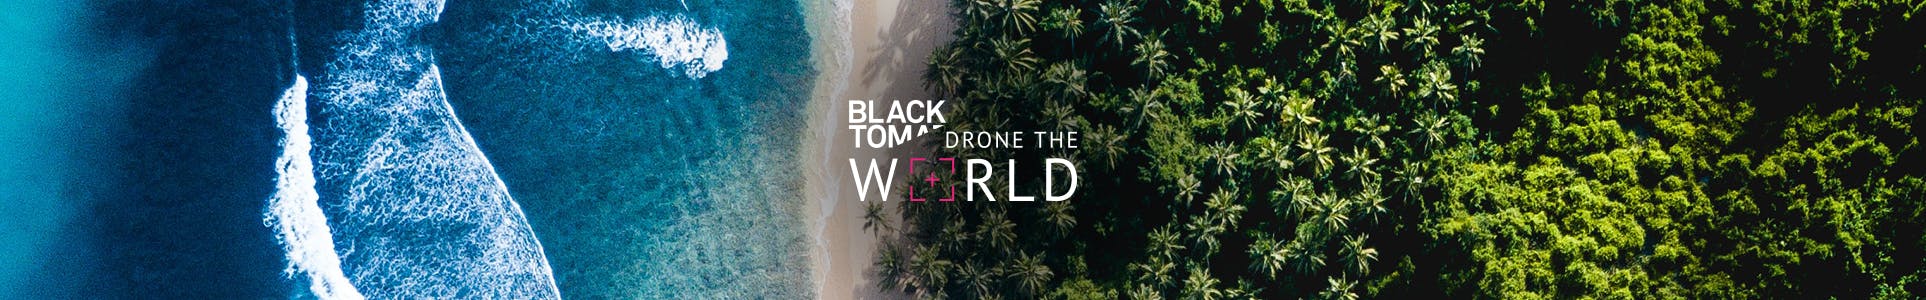 Holiday Film Service | Drone The World with Black Tomato